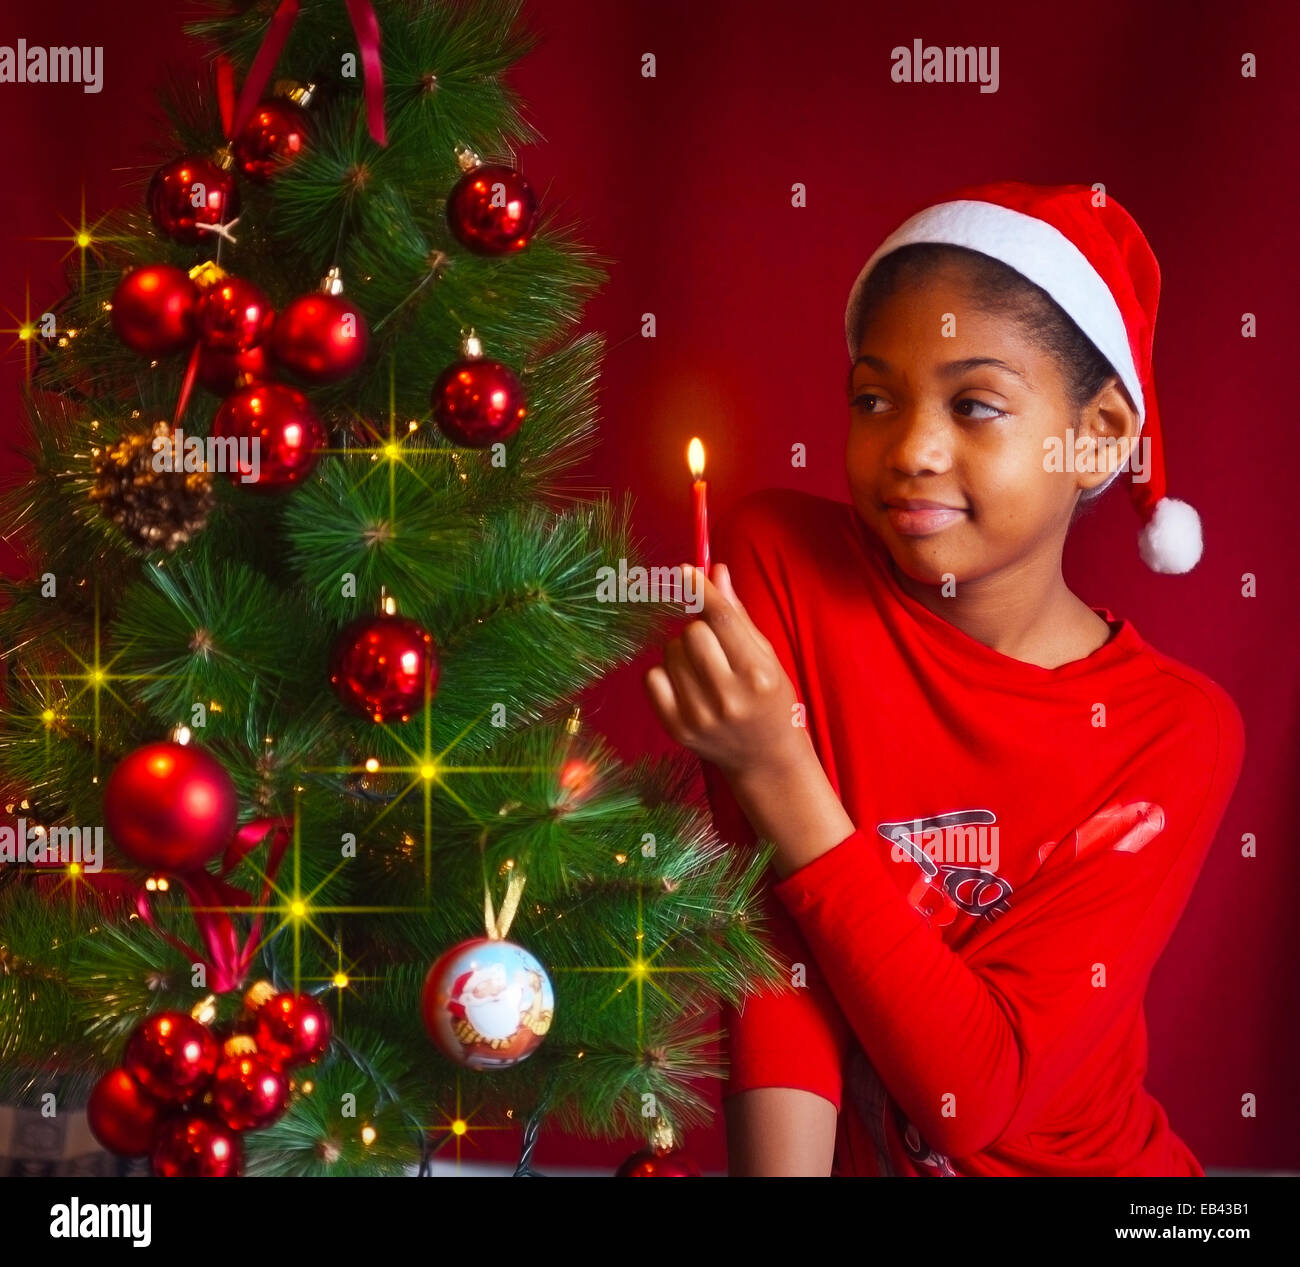 black girl dressed as Santa Claus who decorate the Christmas tree with lights, balls and candles Stock Photo